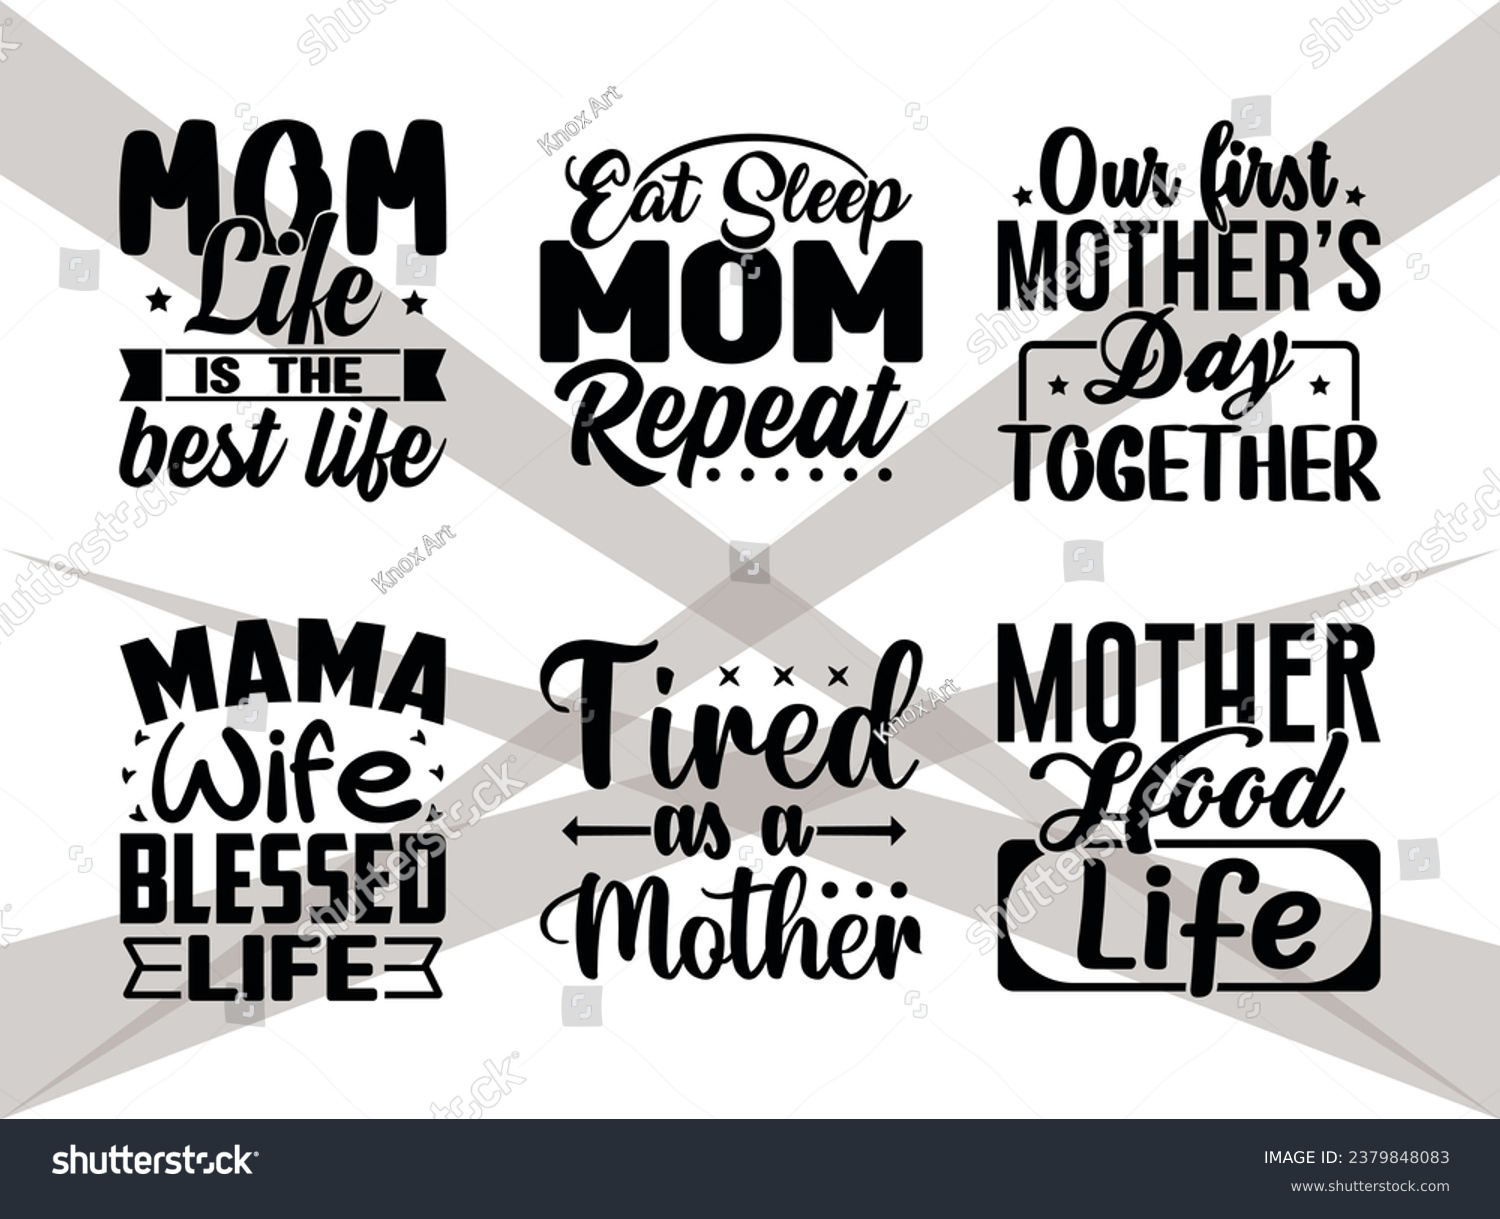 SVG of Mom Bundle - Mothers Day- Mama Wife Blessed Life- Eat Sleep Mom Repeat- Our First Mothers Day Together- Mom Life Is The Best Life-Tired As A Mother- Mother Hood Life- Mom Quote Vector svg